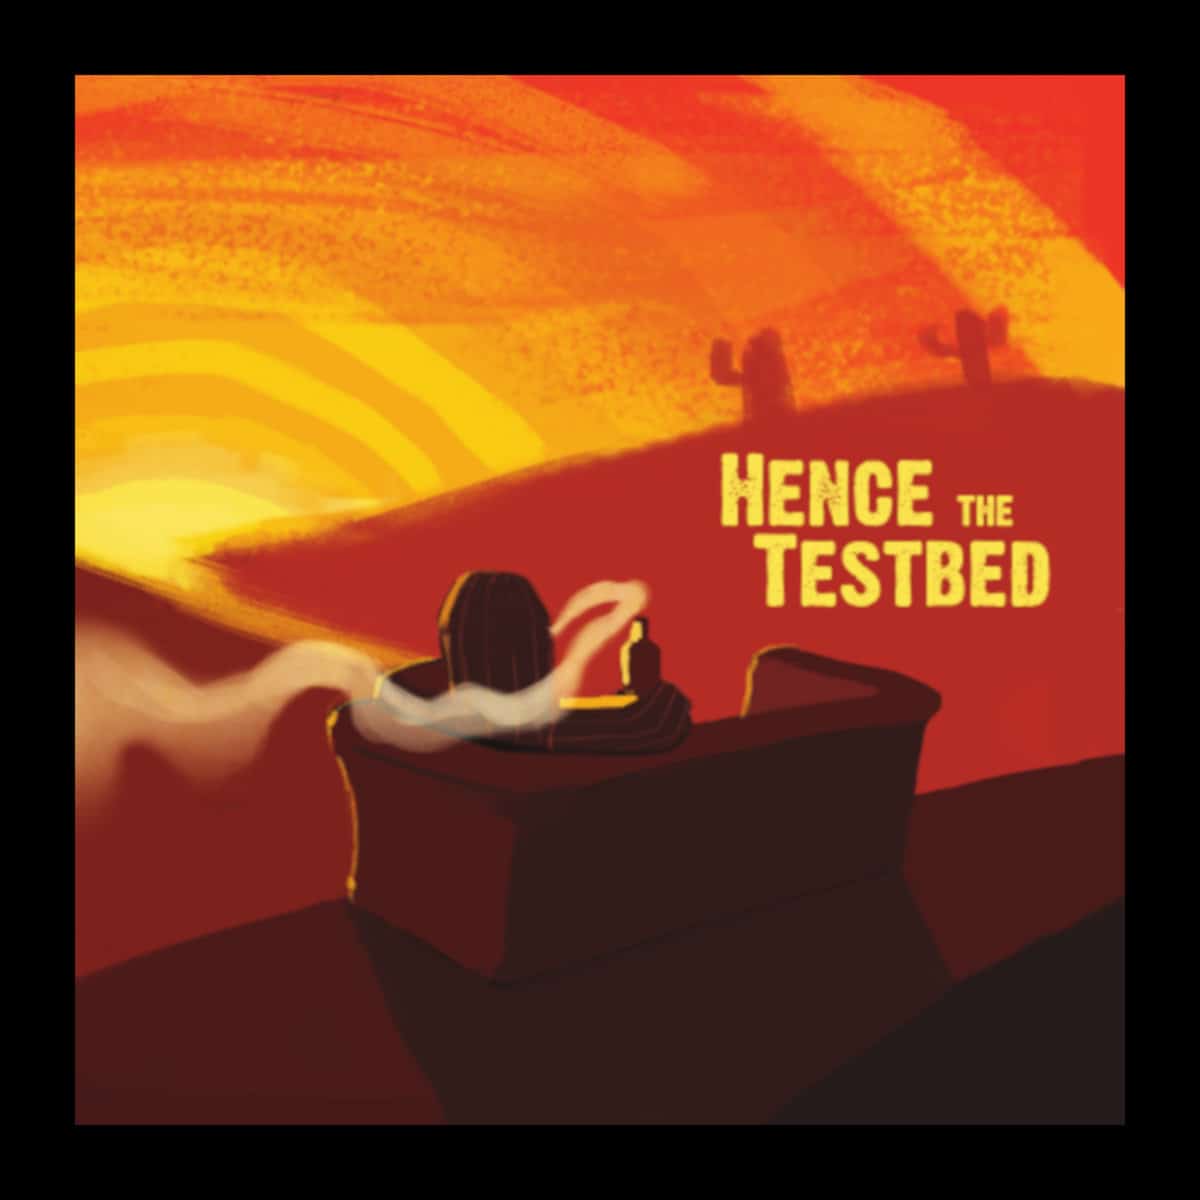 Cover art for Hence the Testbed by Hence the Testbed. Mix (1 song): Infidel Studios